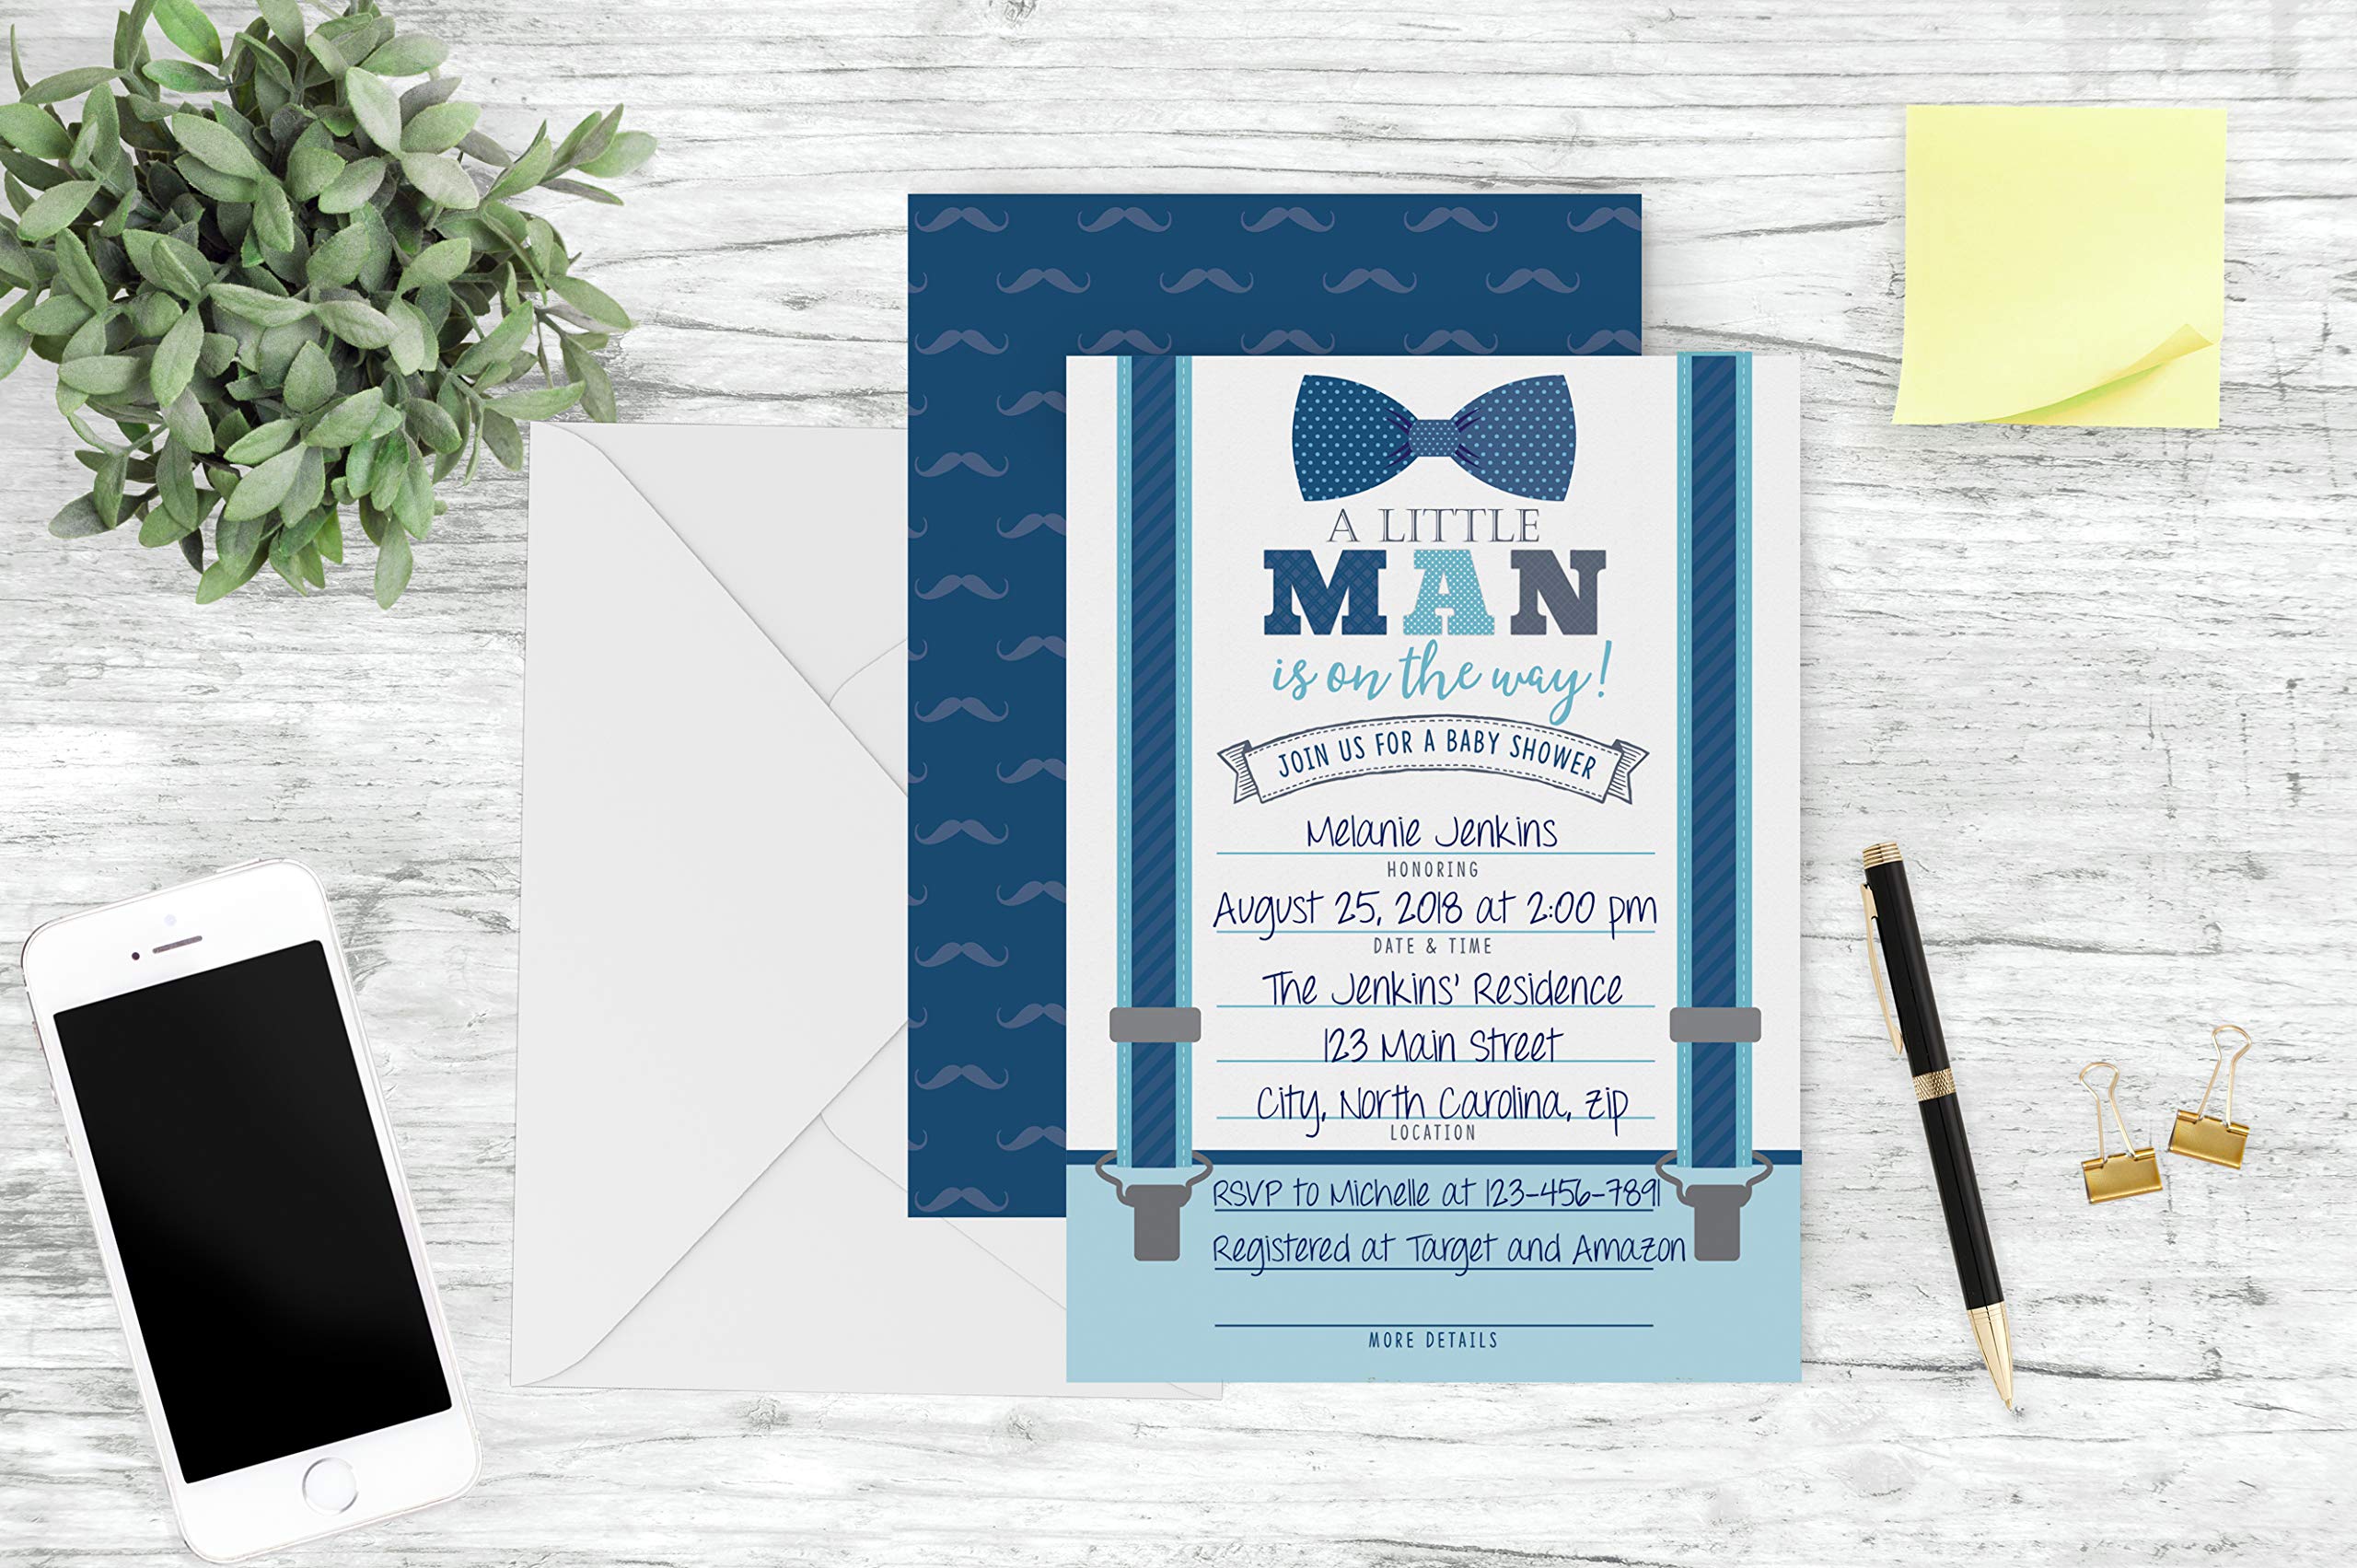 Your Main Event Prints Little Man Baby Shower Invitations, Boy Baby Shower Invites with Diaper Raffles Cards, Bow Tie and Mustaches, Sprinkle, 20 Invites Including Envelopes